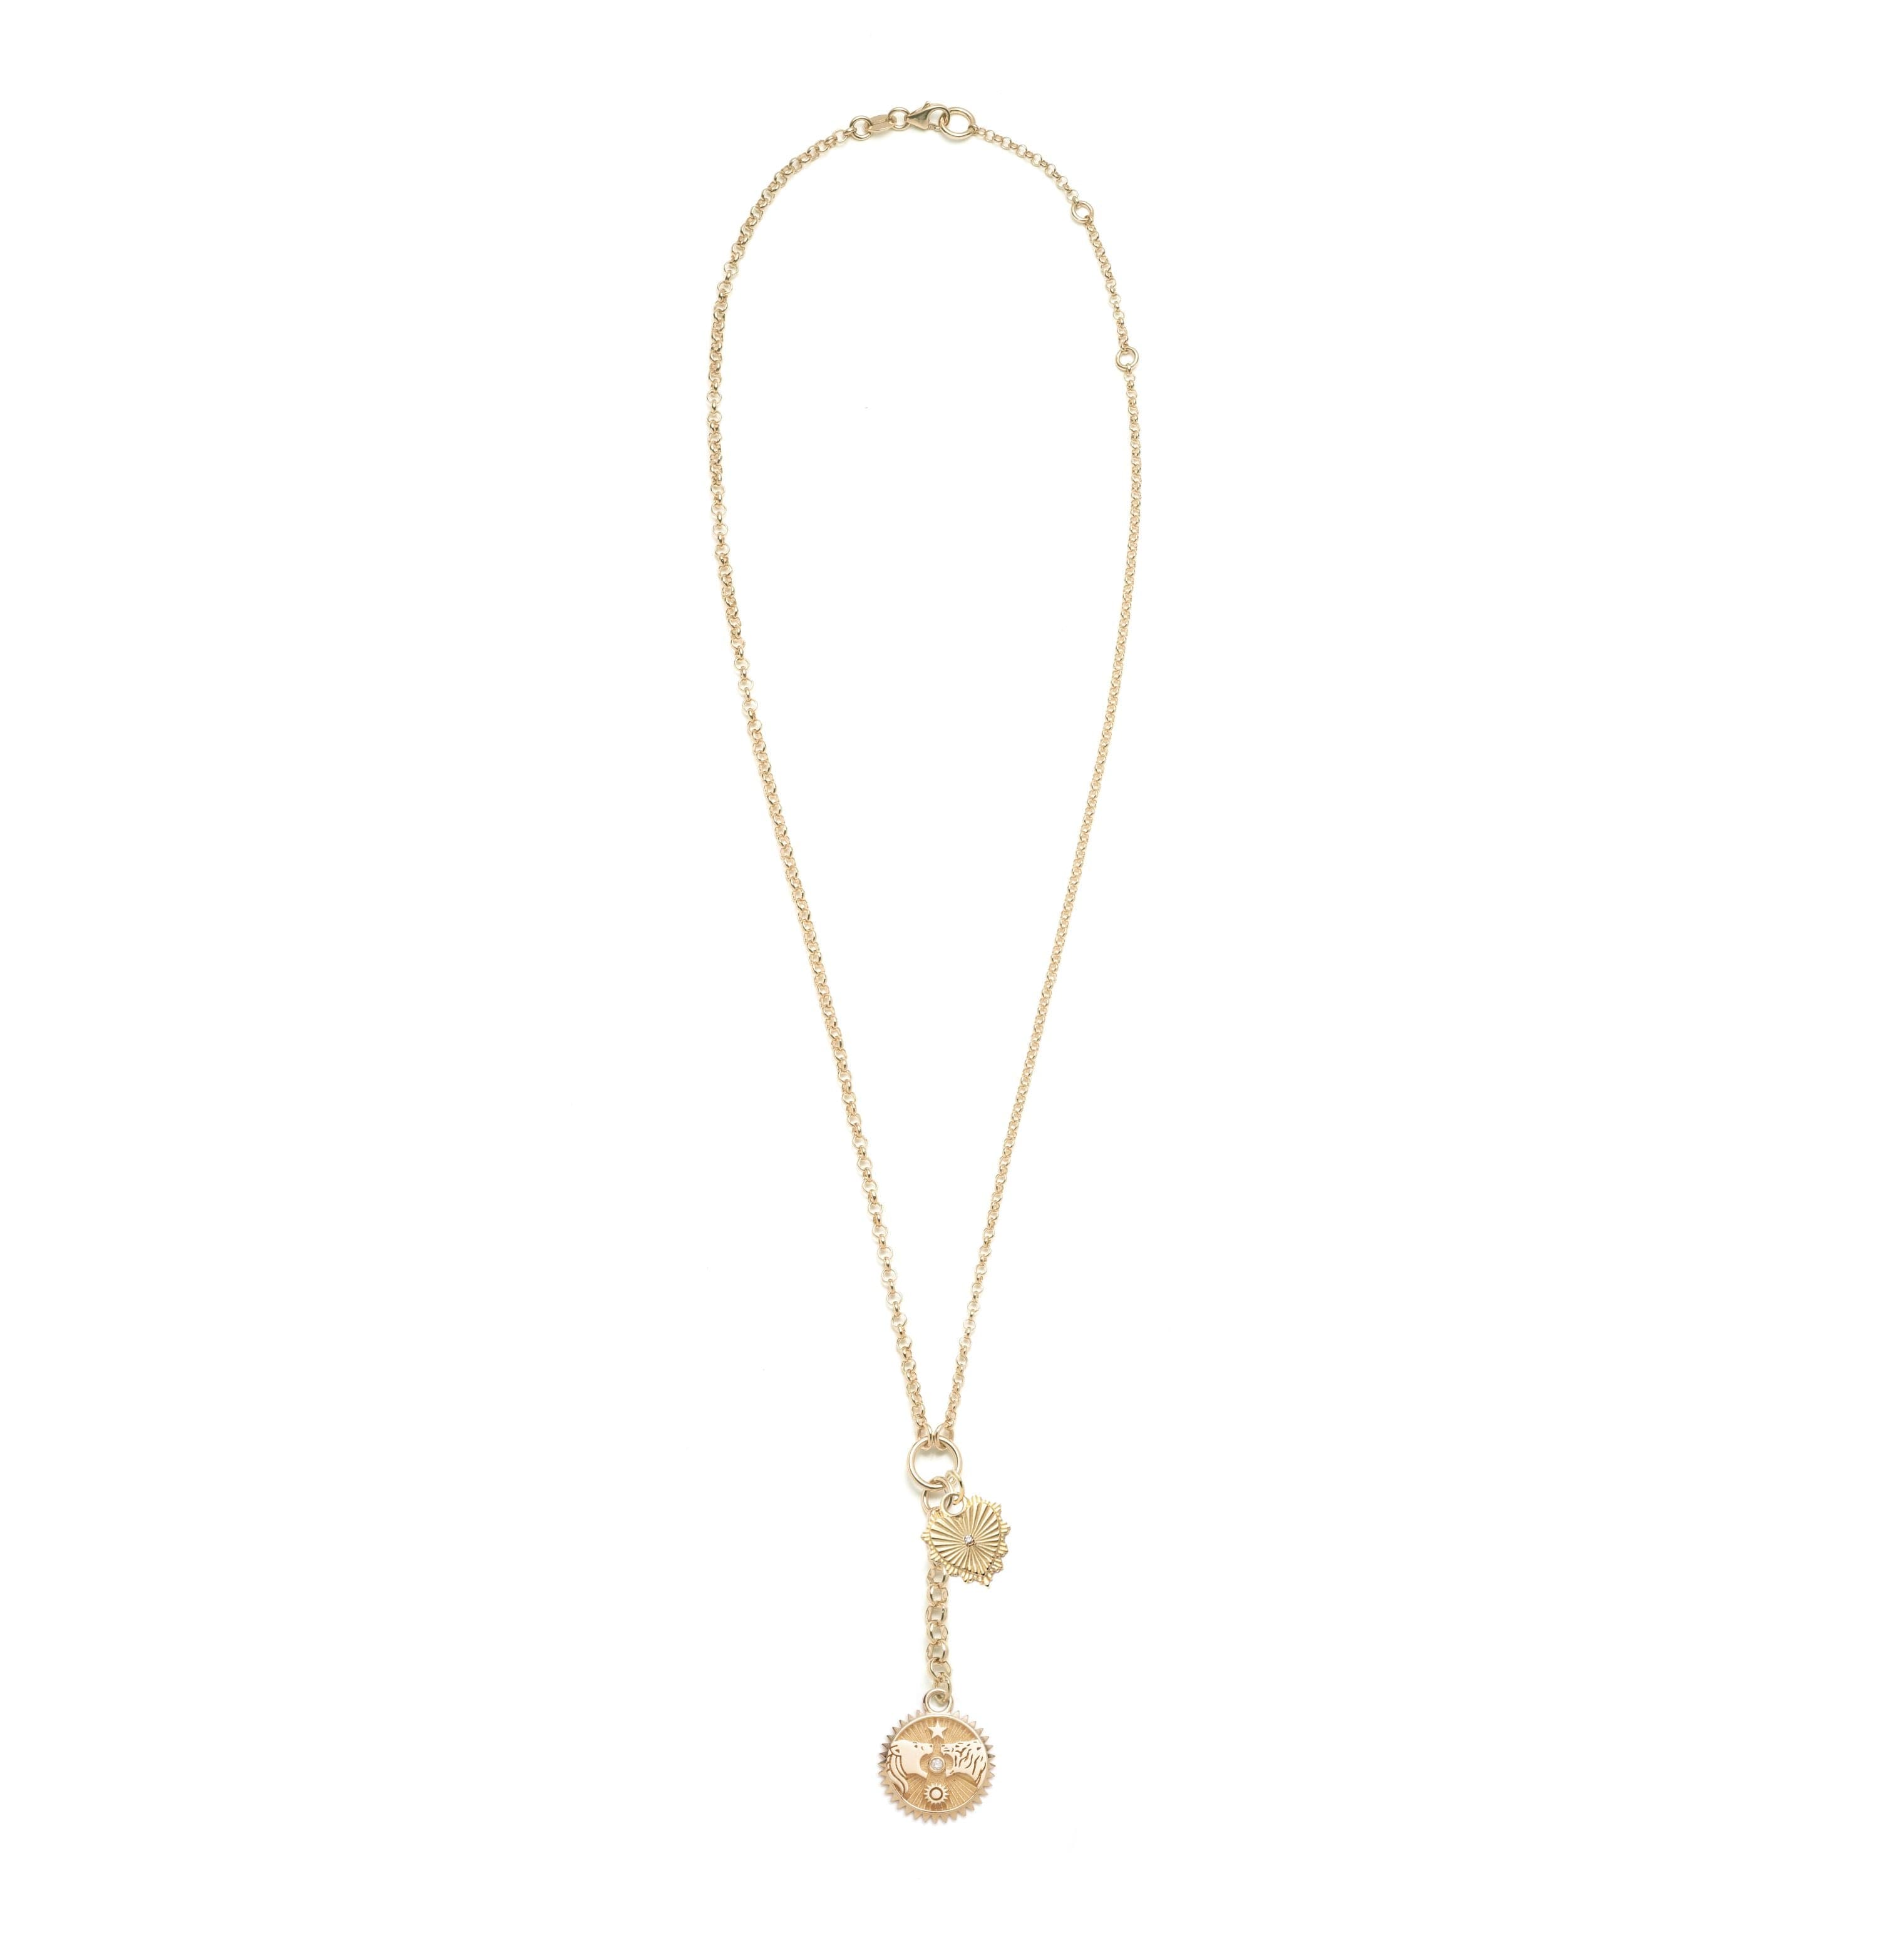 Strength + Love Story : Small Mixed Belcher Extension Chain Necklace